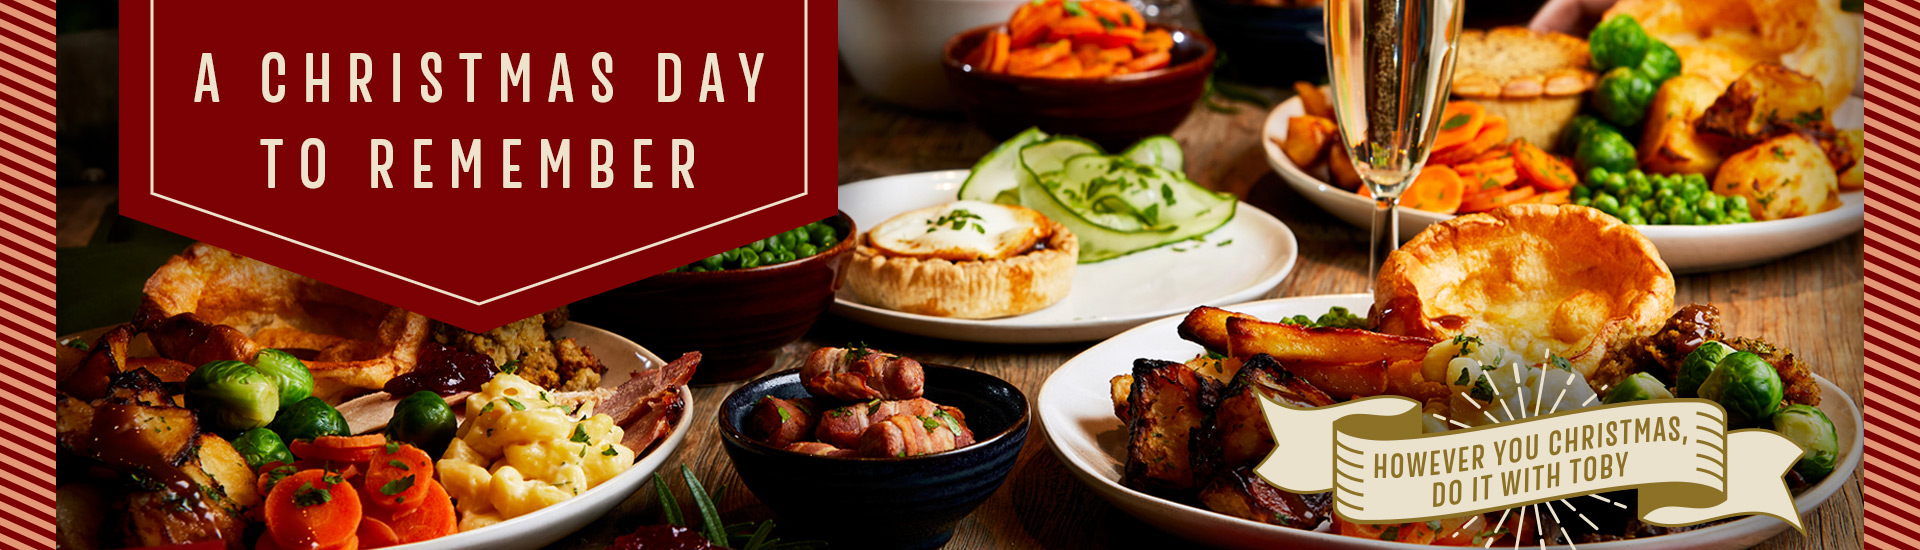 Christmas Day menu at The Artichoke Toby Carvery